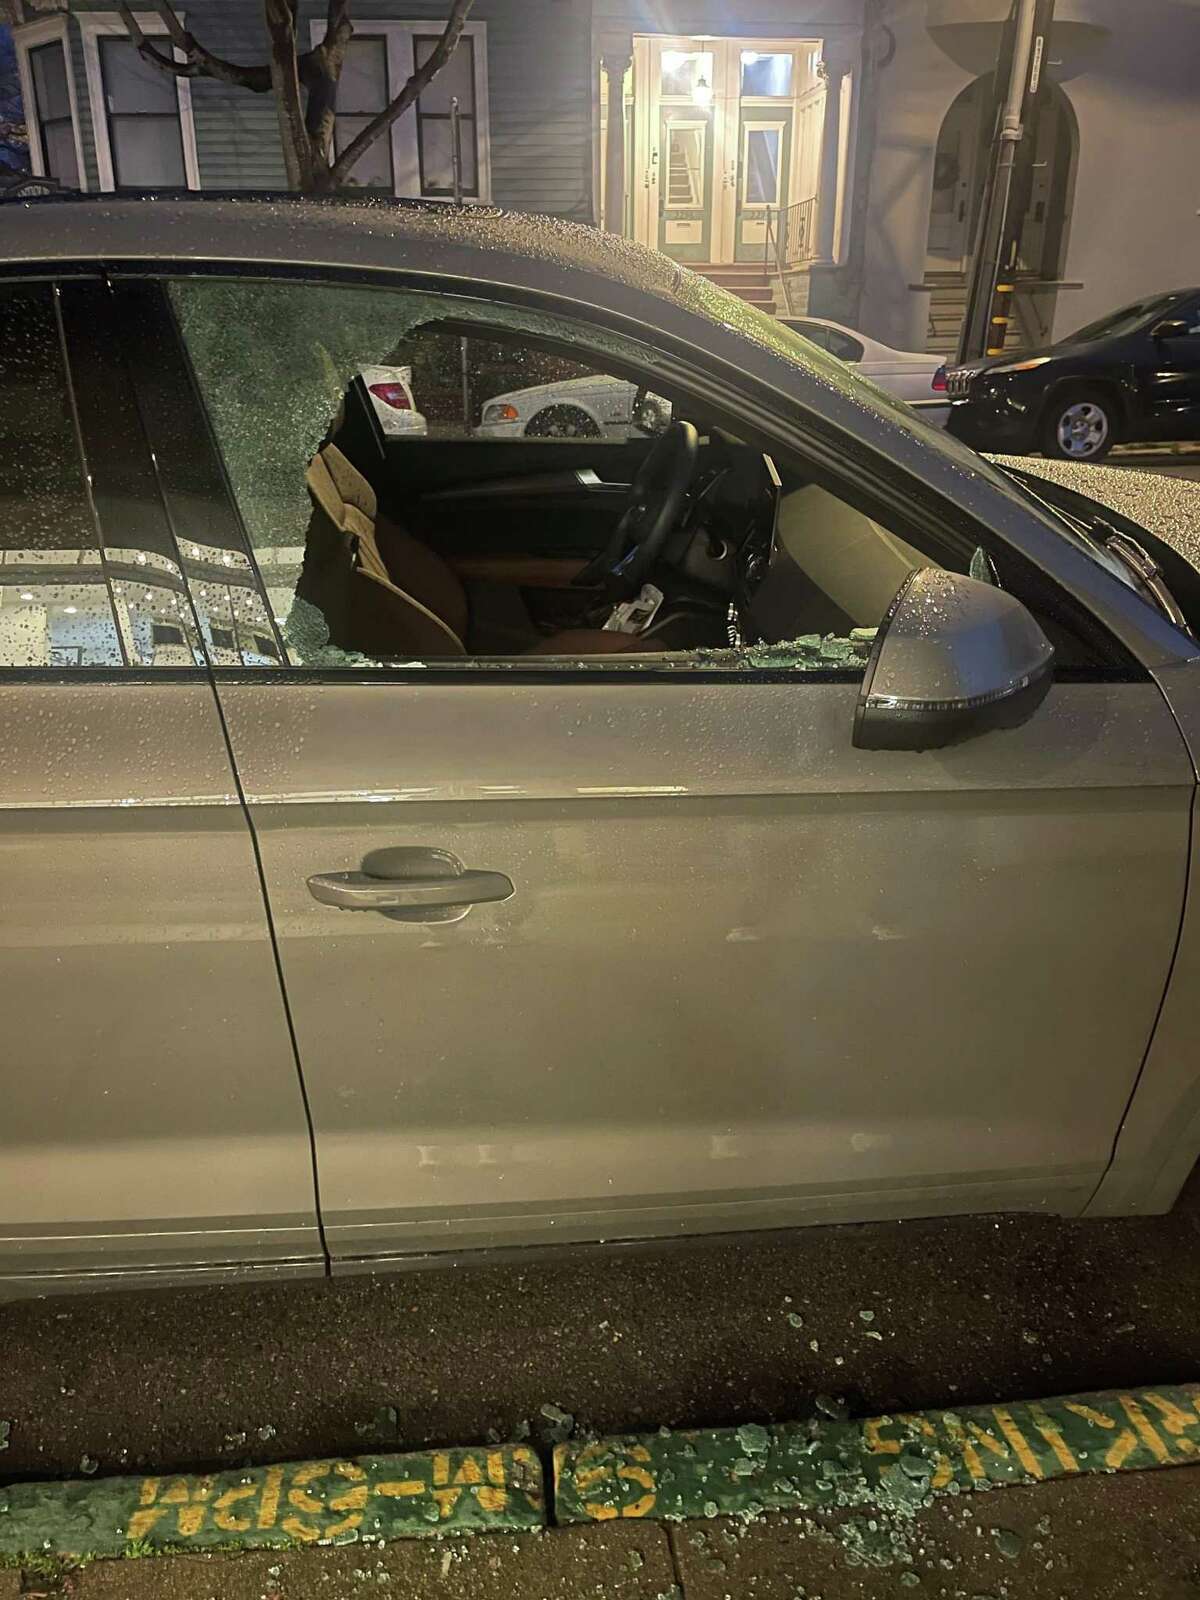 One of more than a dozen car windows smashed to gain entry on Filbert Street in San Francisco, Calif.